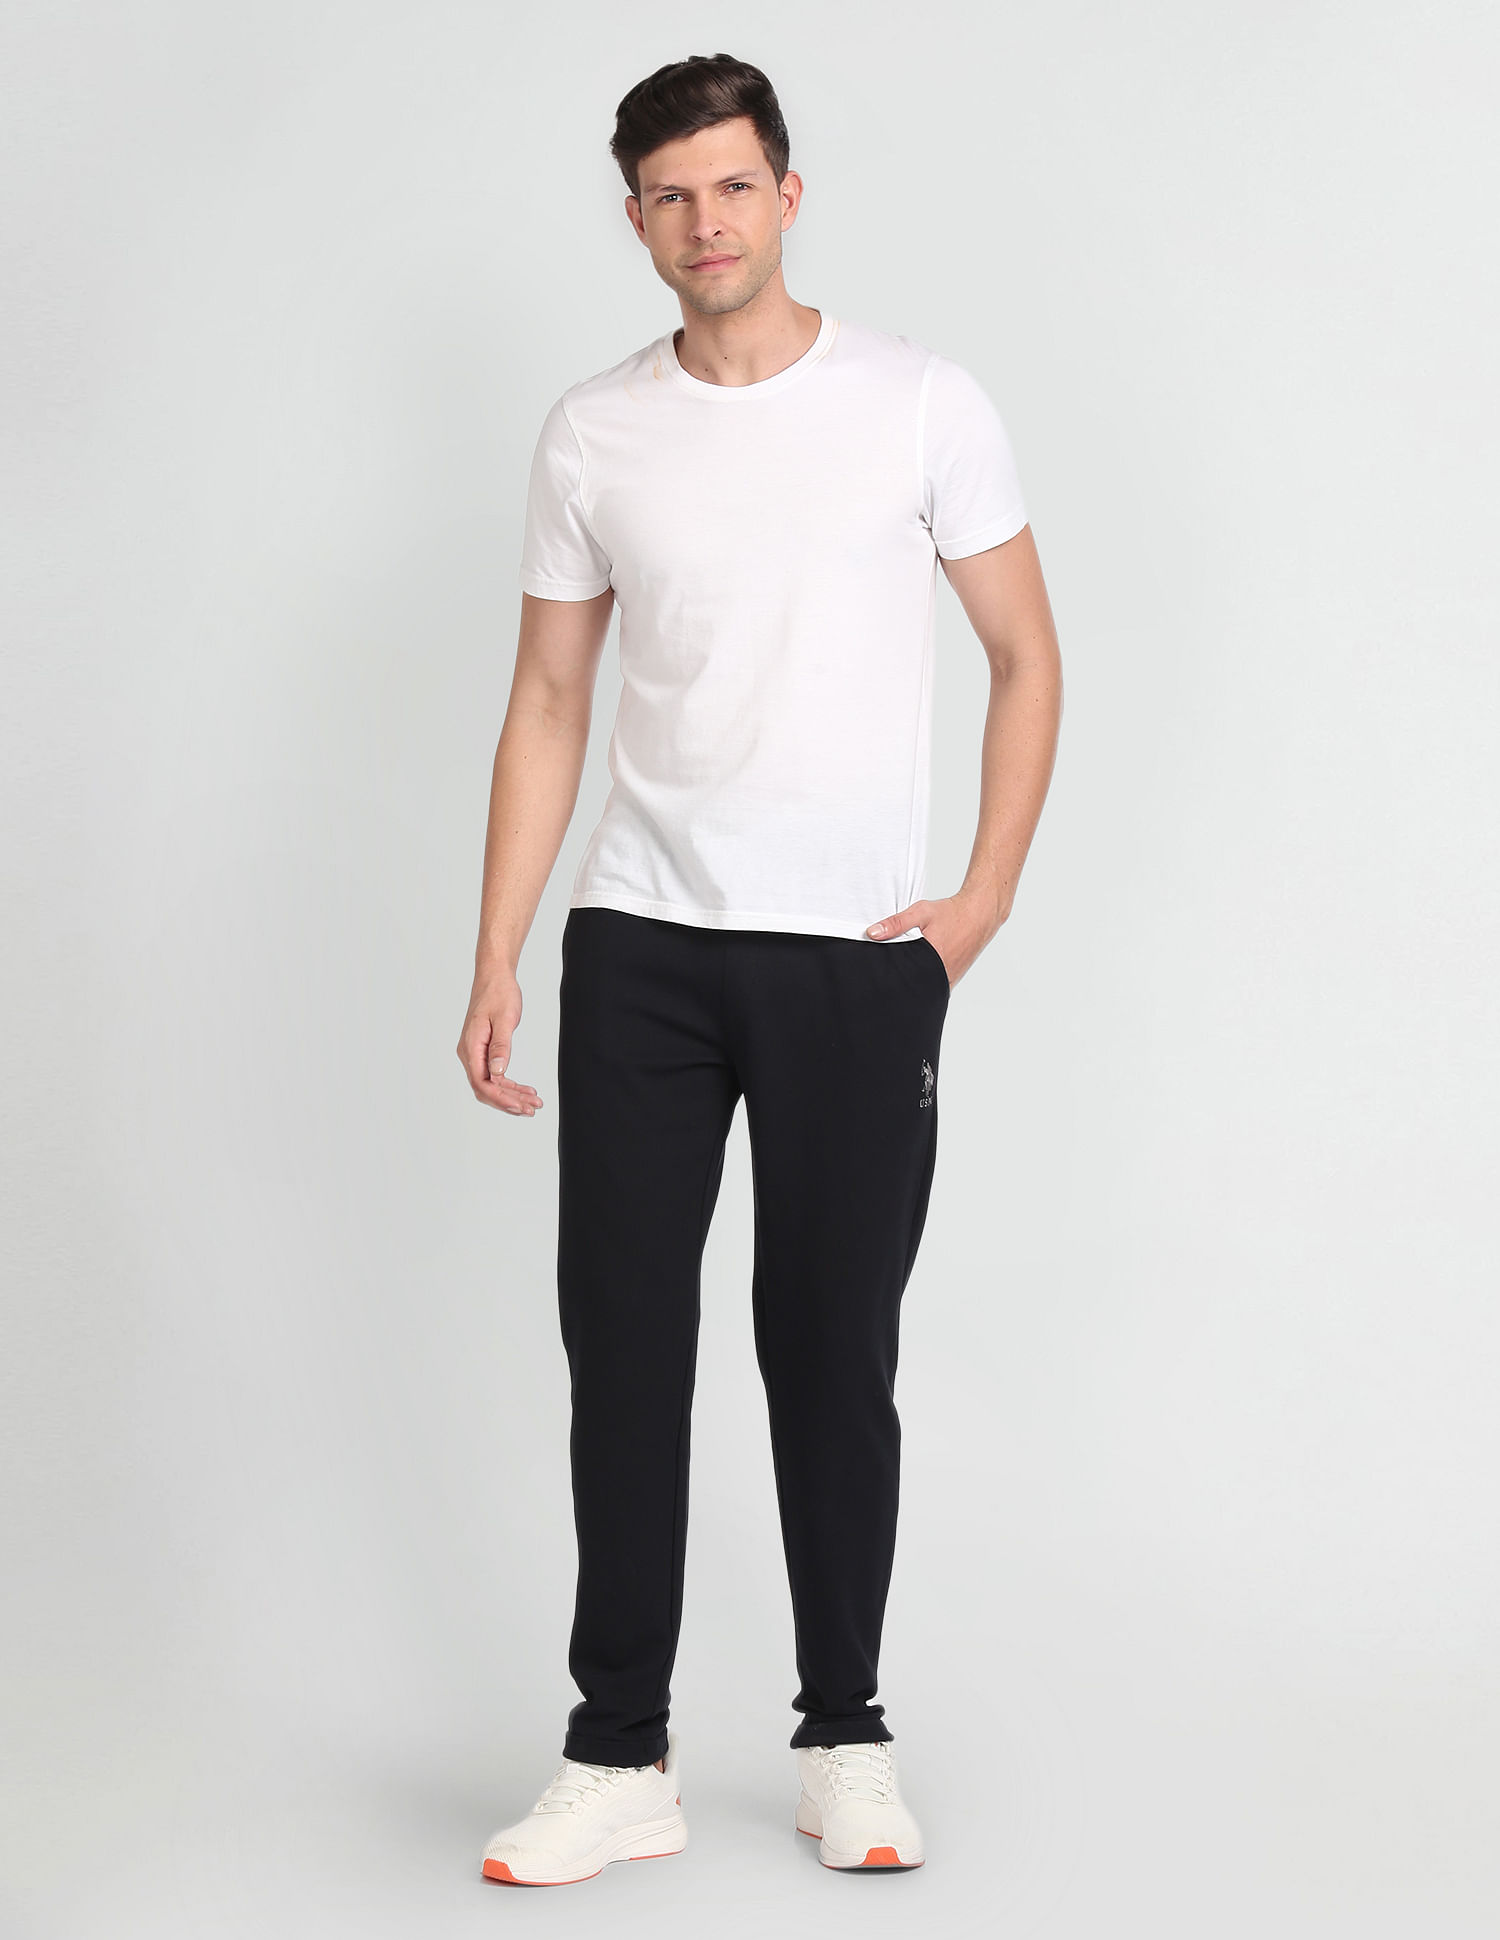 Buy U.S. POLO ASSN. Textured Drawstring Track Pants online